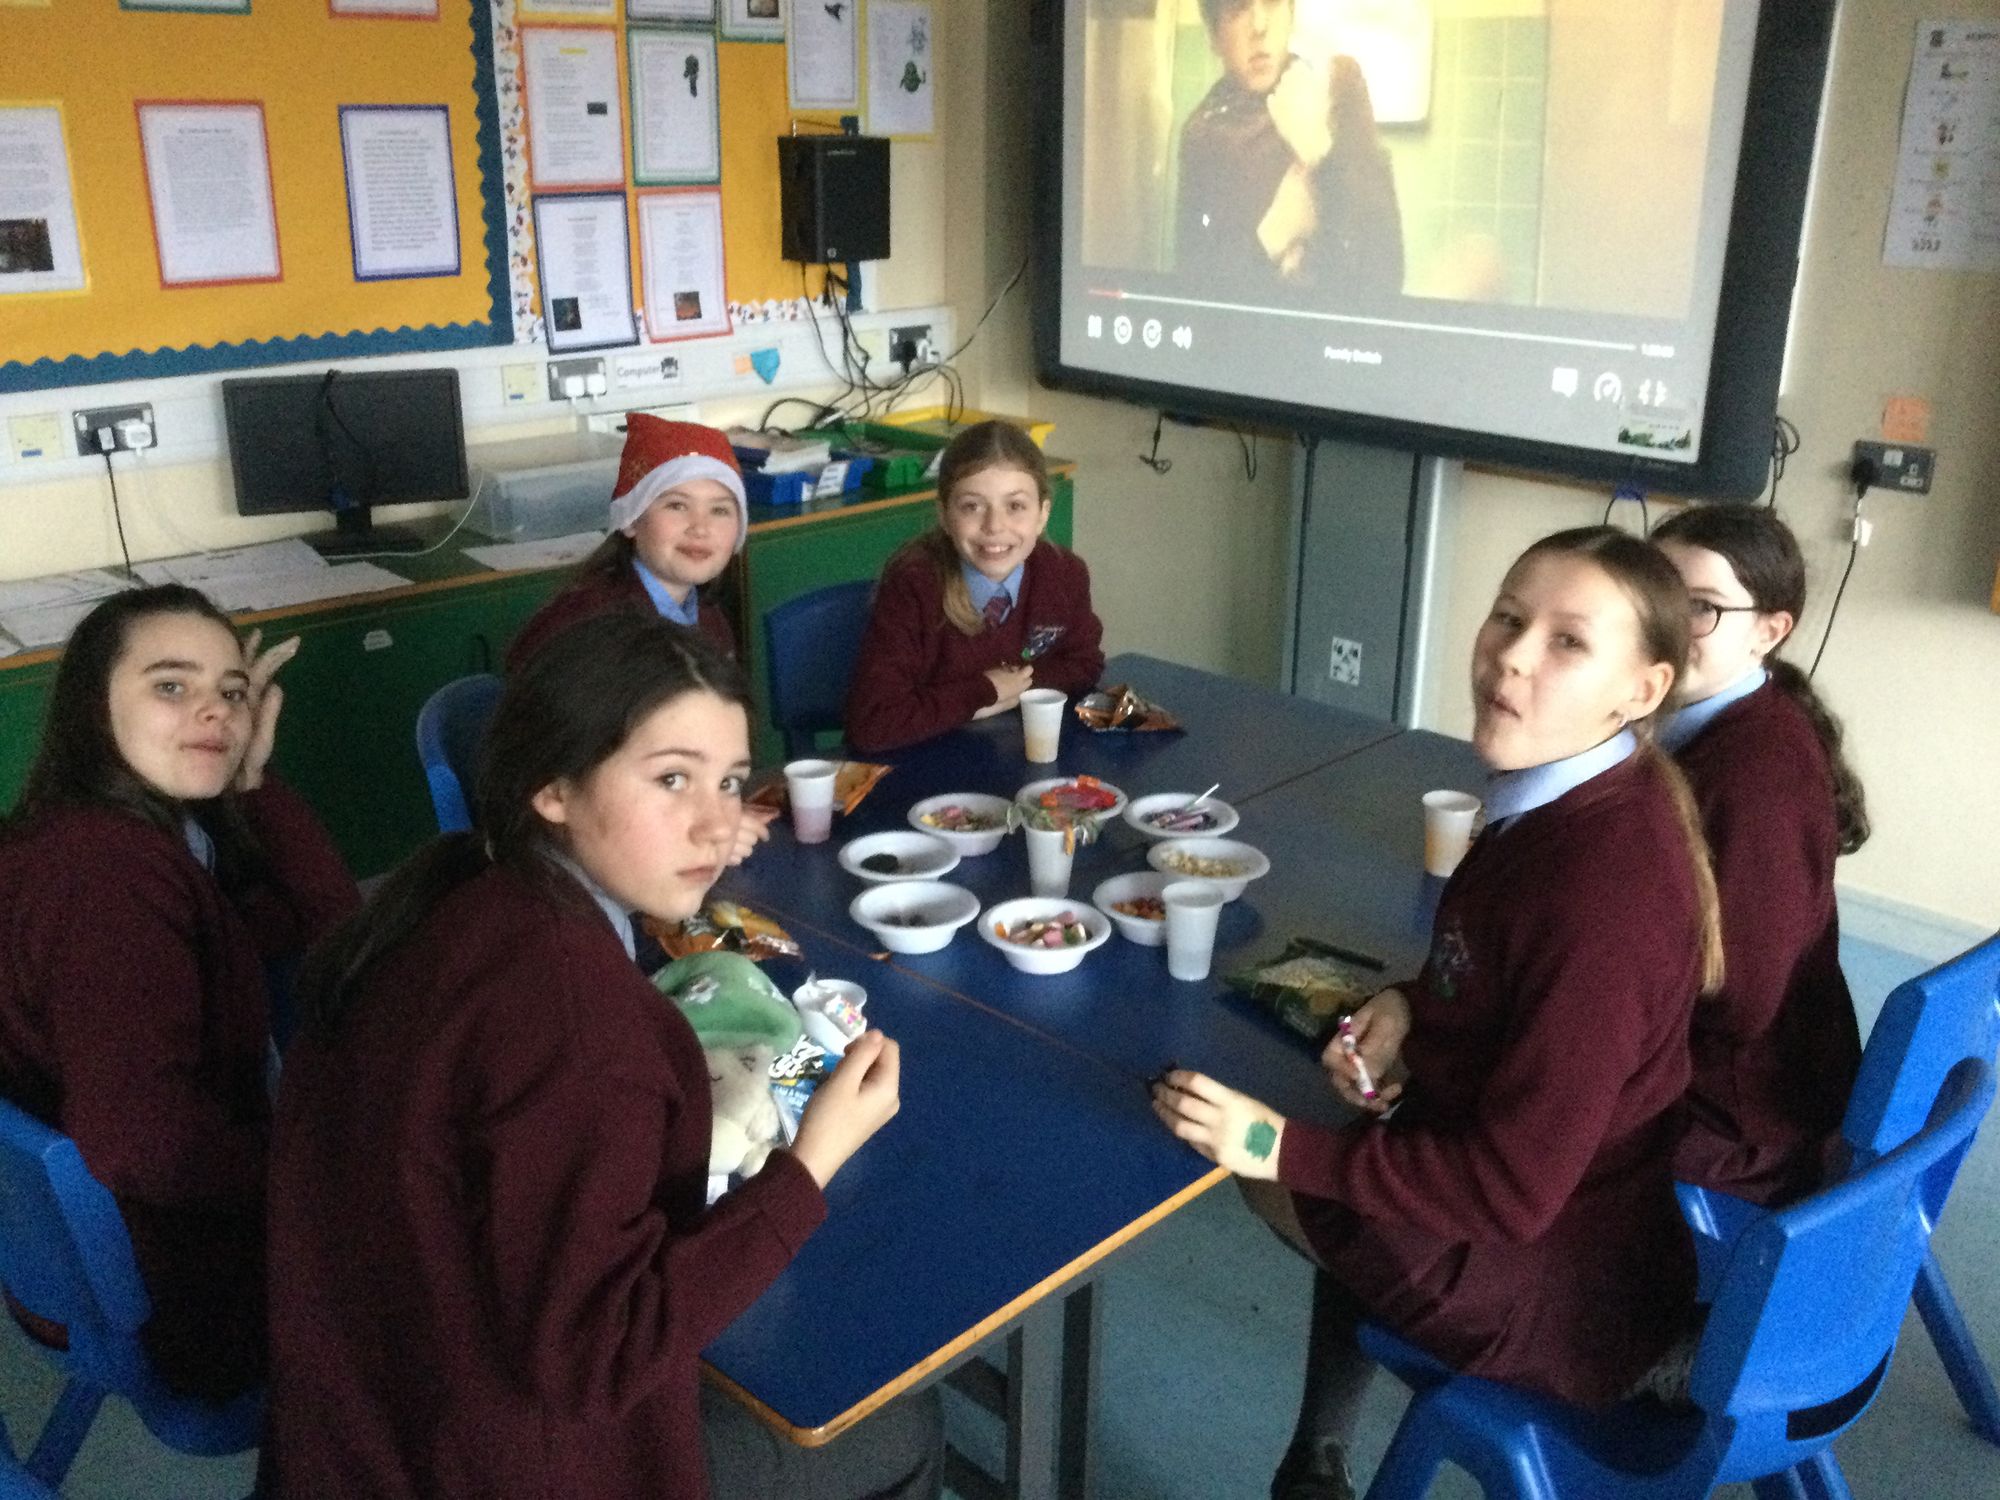 Year 7B enjoyed a festive Christmas movie and party